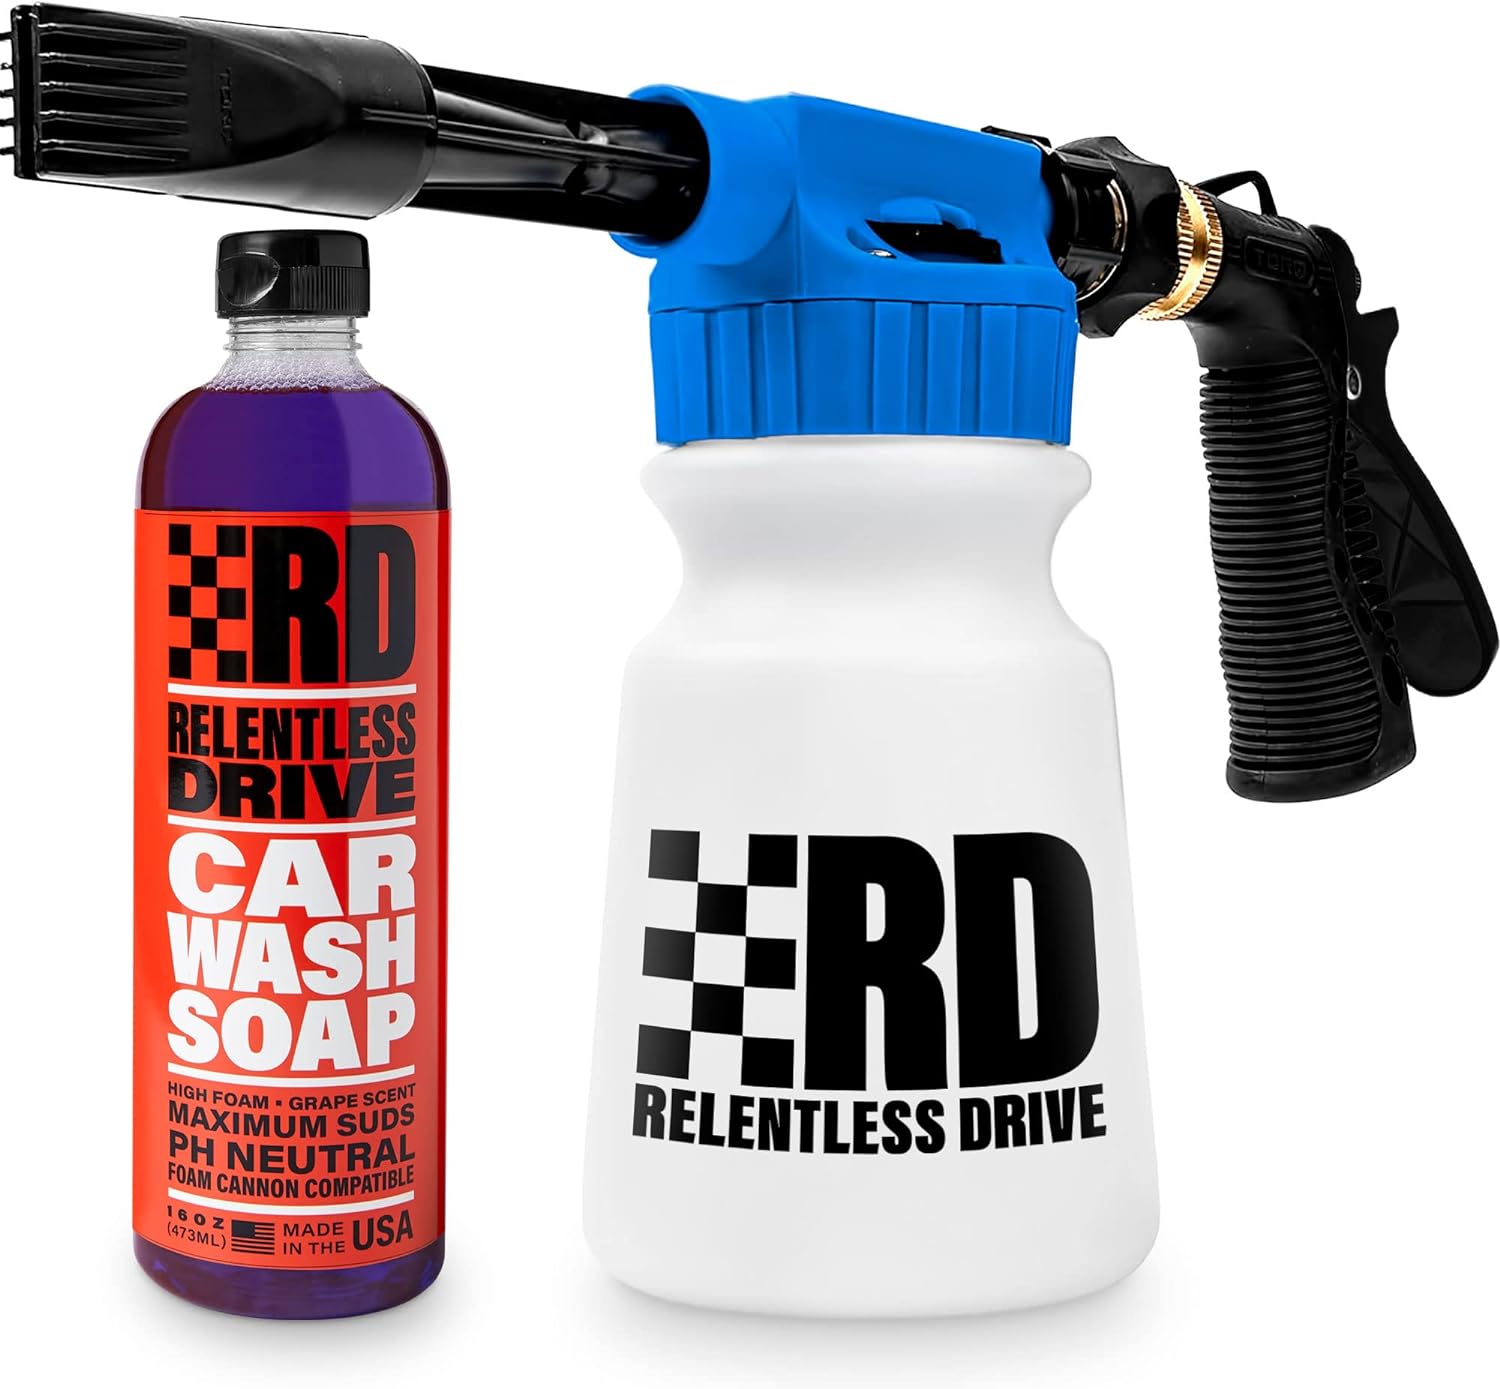 Relentless Drive Premium Foam Cannon for Garden Hose (Connects to Any Garden Hose) - Leak Free, Easy to Use Foam Gun has 6 Spray Patterns for Ma